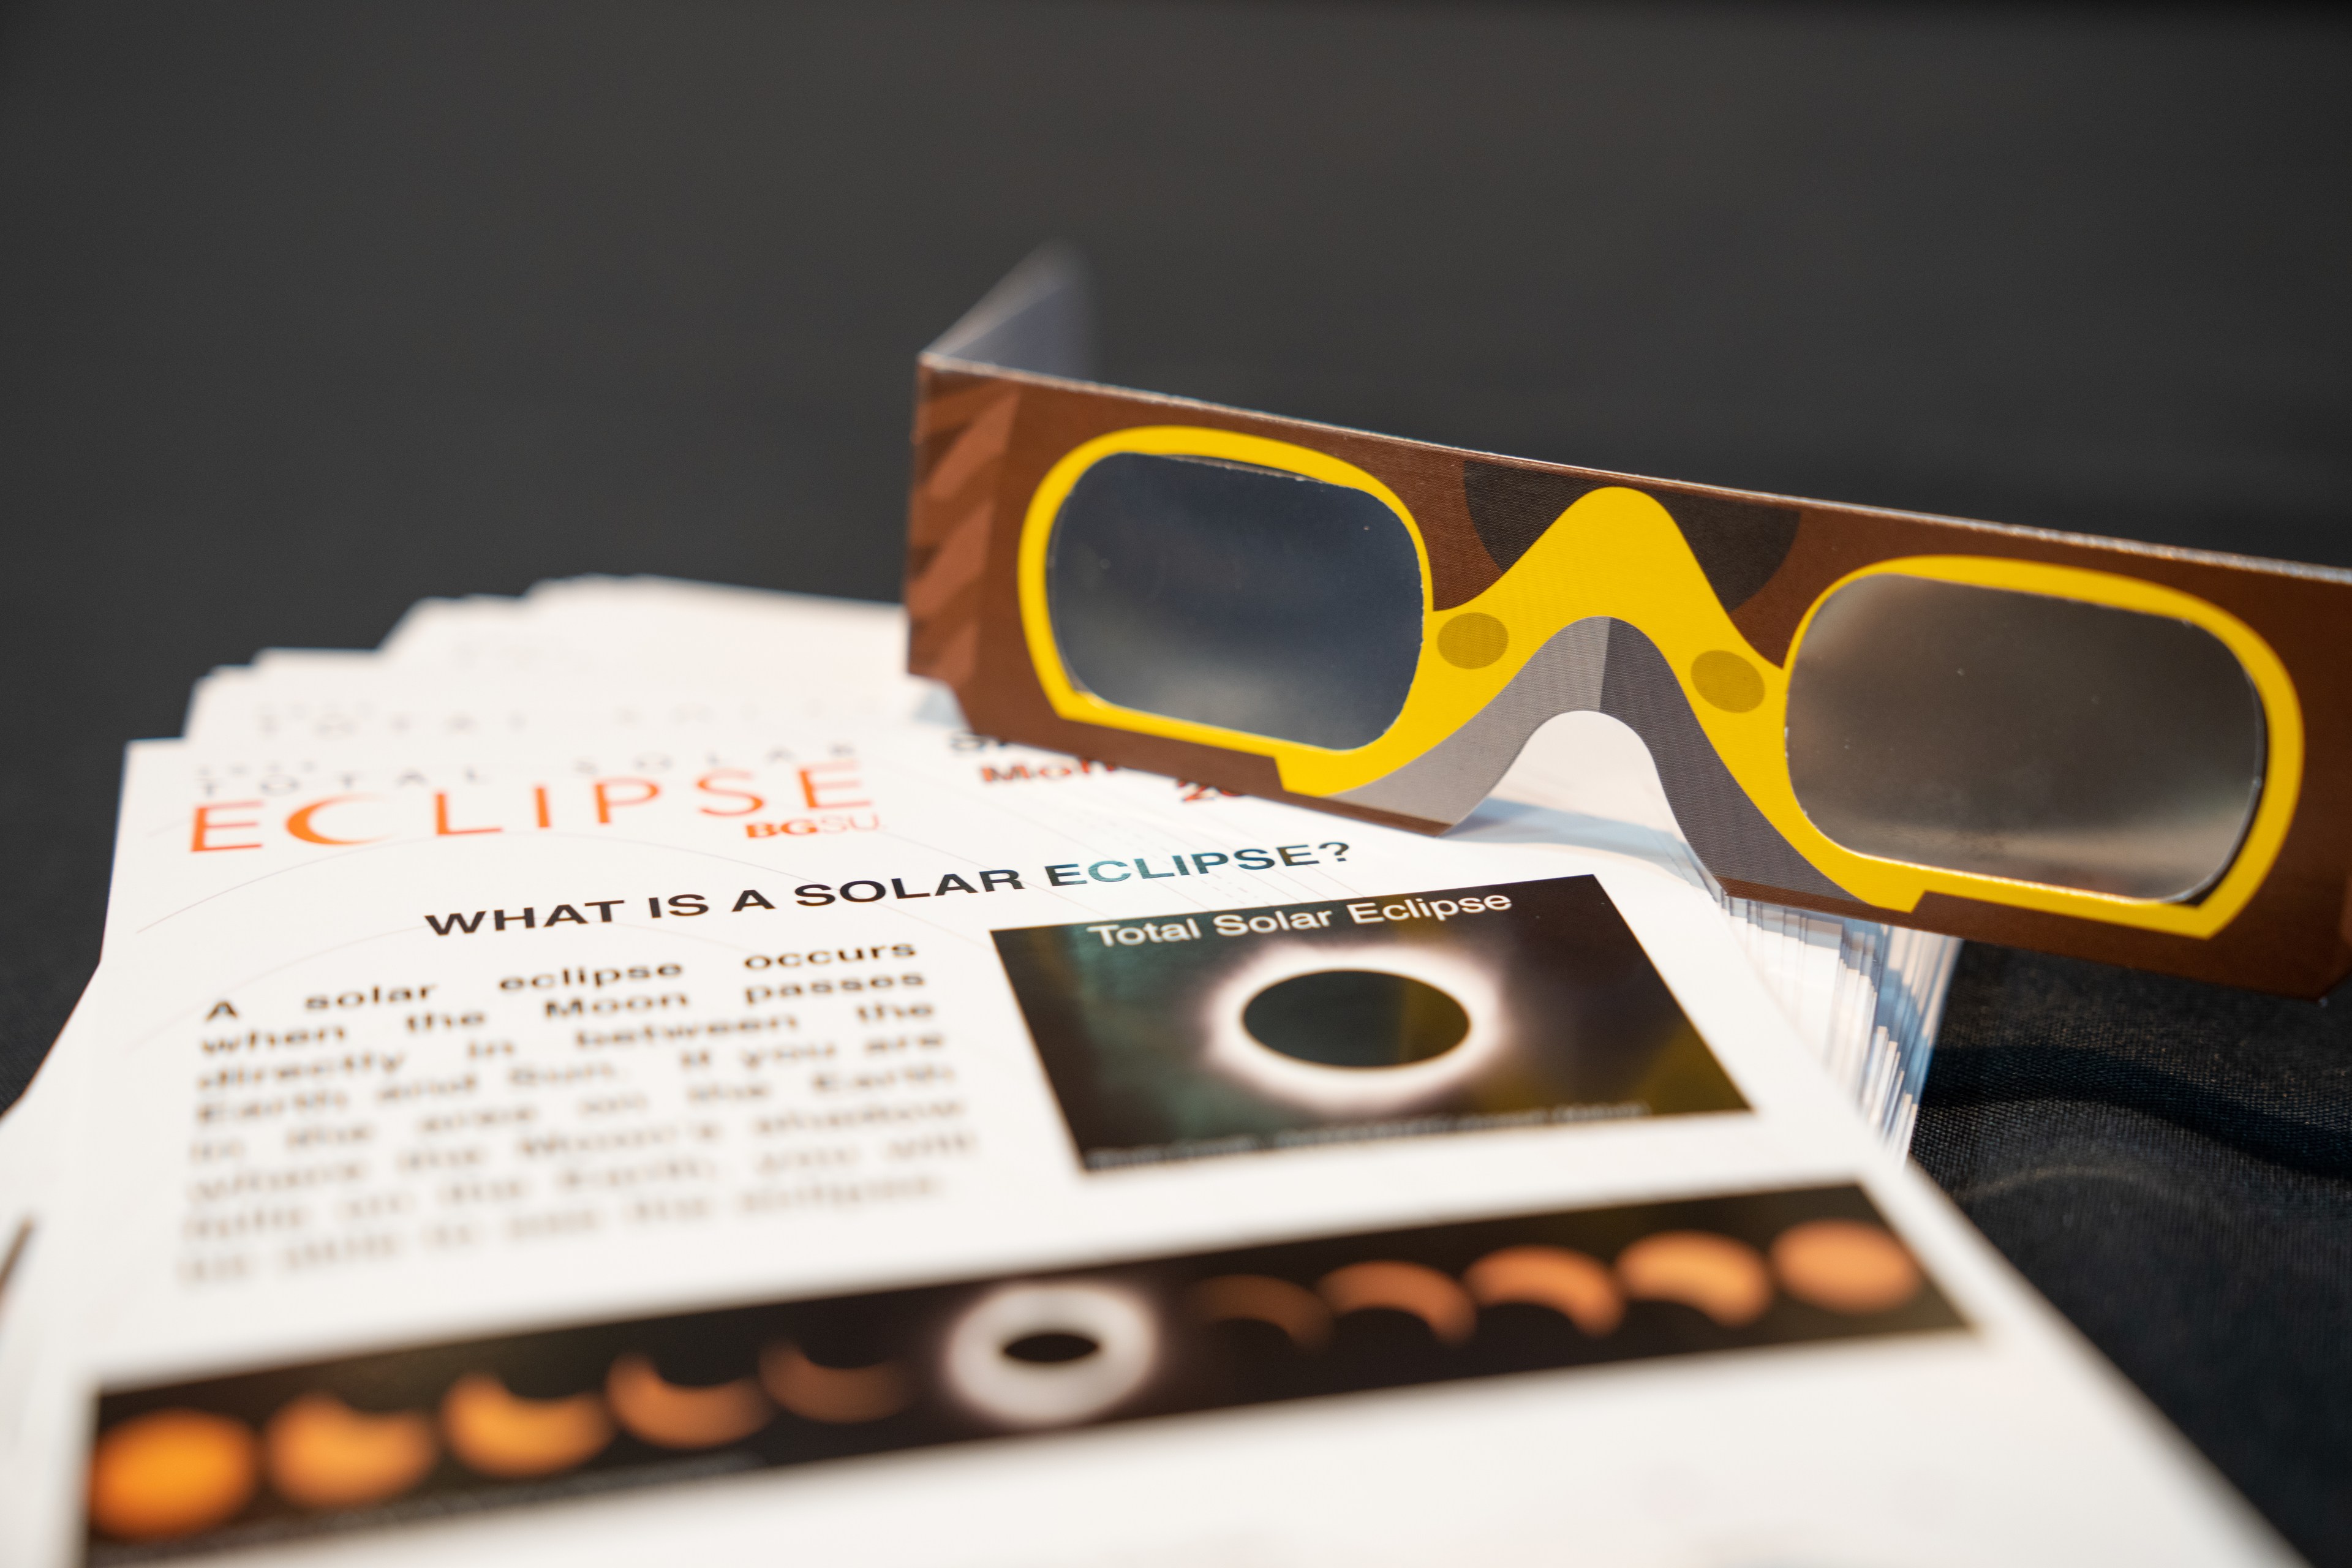 Paper handouts show information about the total solar eclipse and safe eclipse viewing glasses